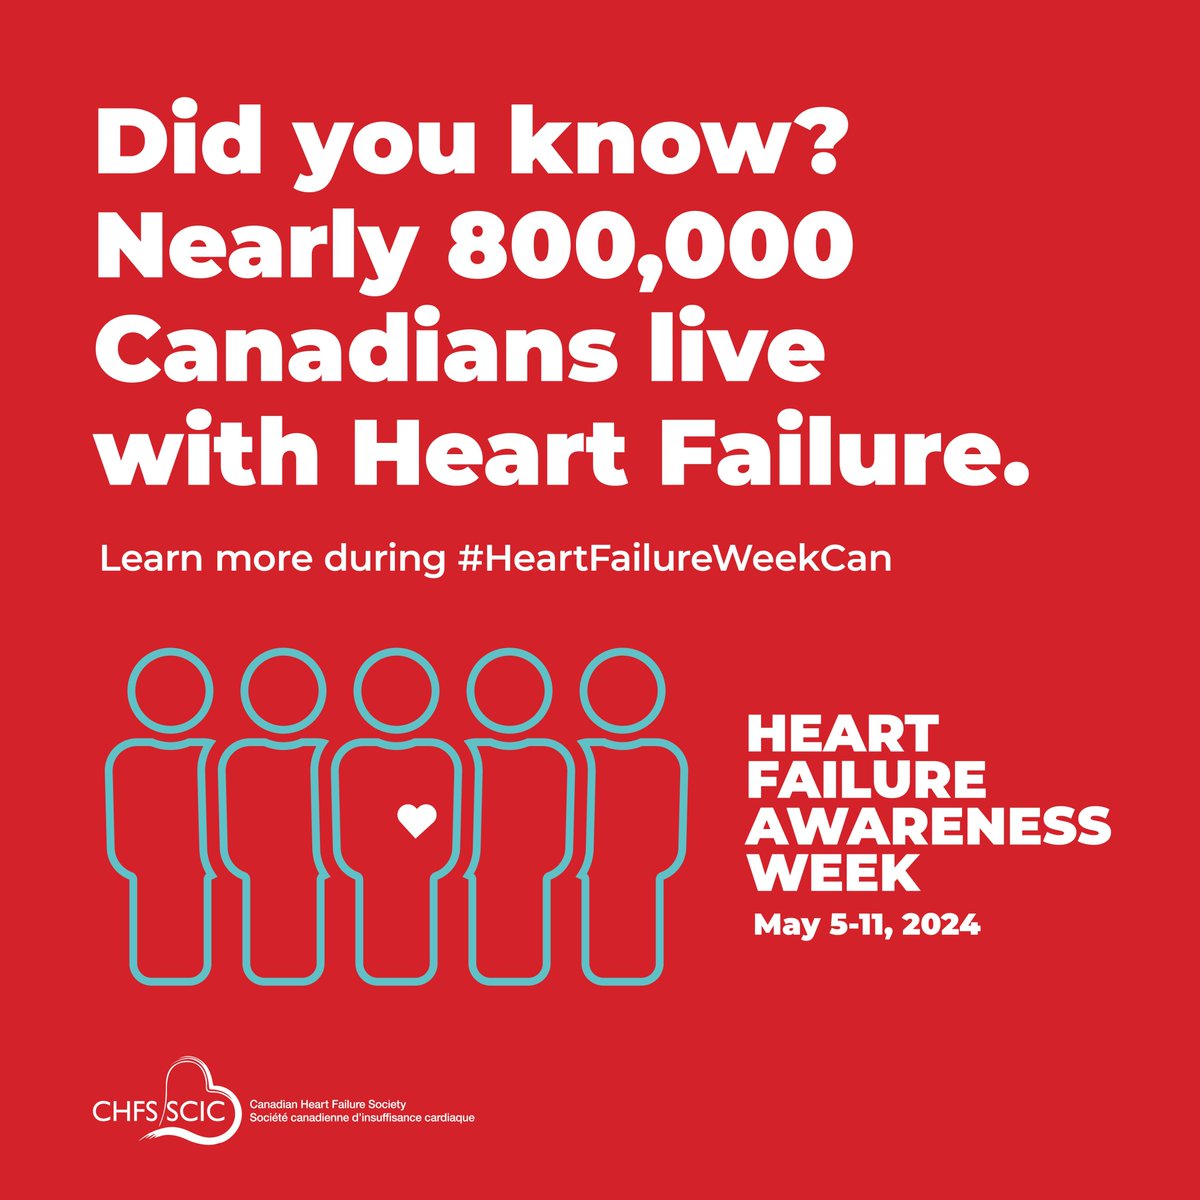 With more people being diagnosed with #HeartFailure every year in Canada, it's crucial to know the signs so you can help yourself or a loved one. Learn more and get involved in spreading awareness by visiting heartfailure.ca for #HeartFailureWeekCan! 🫀